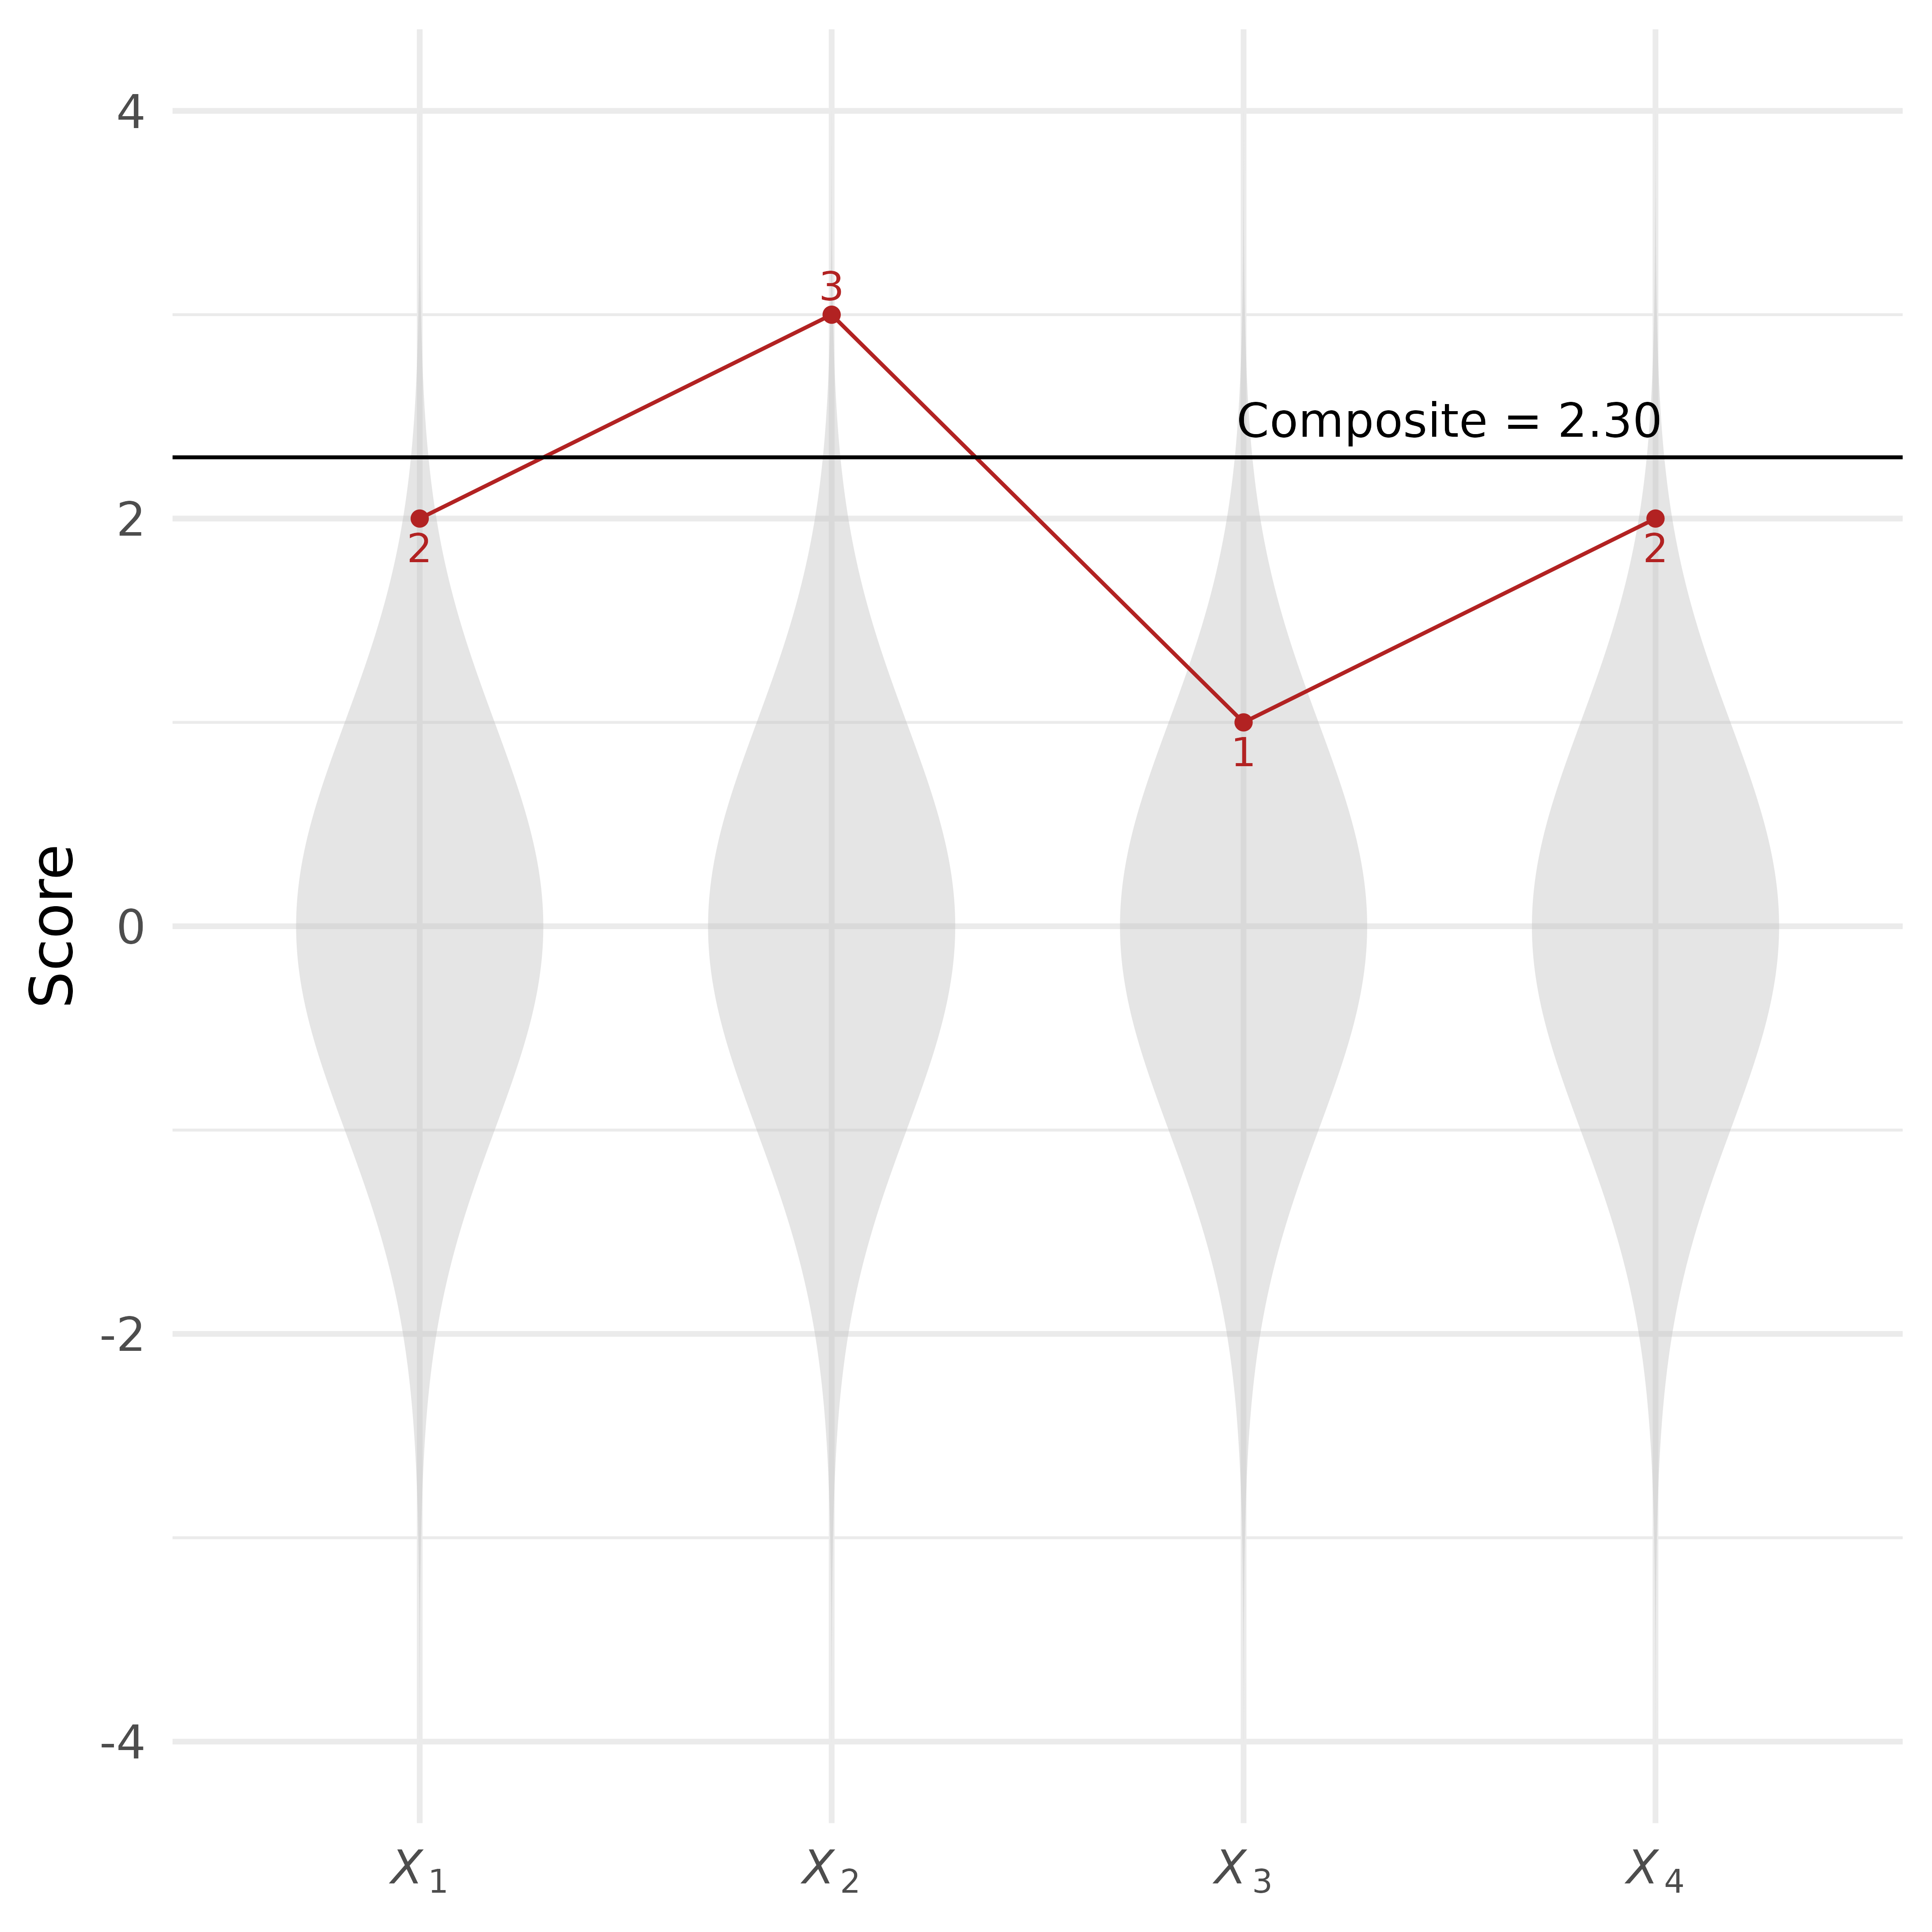 Example profile in a standard multivariate normal distribution.